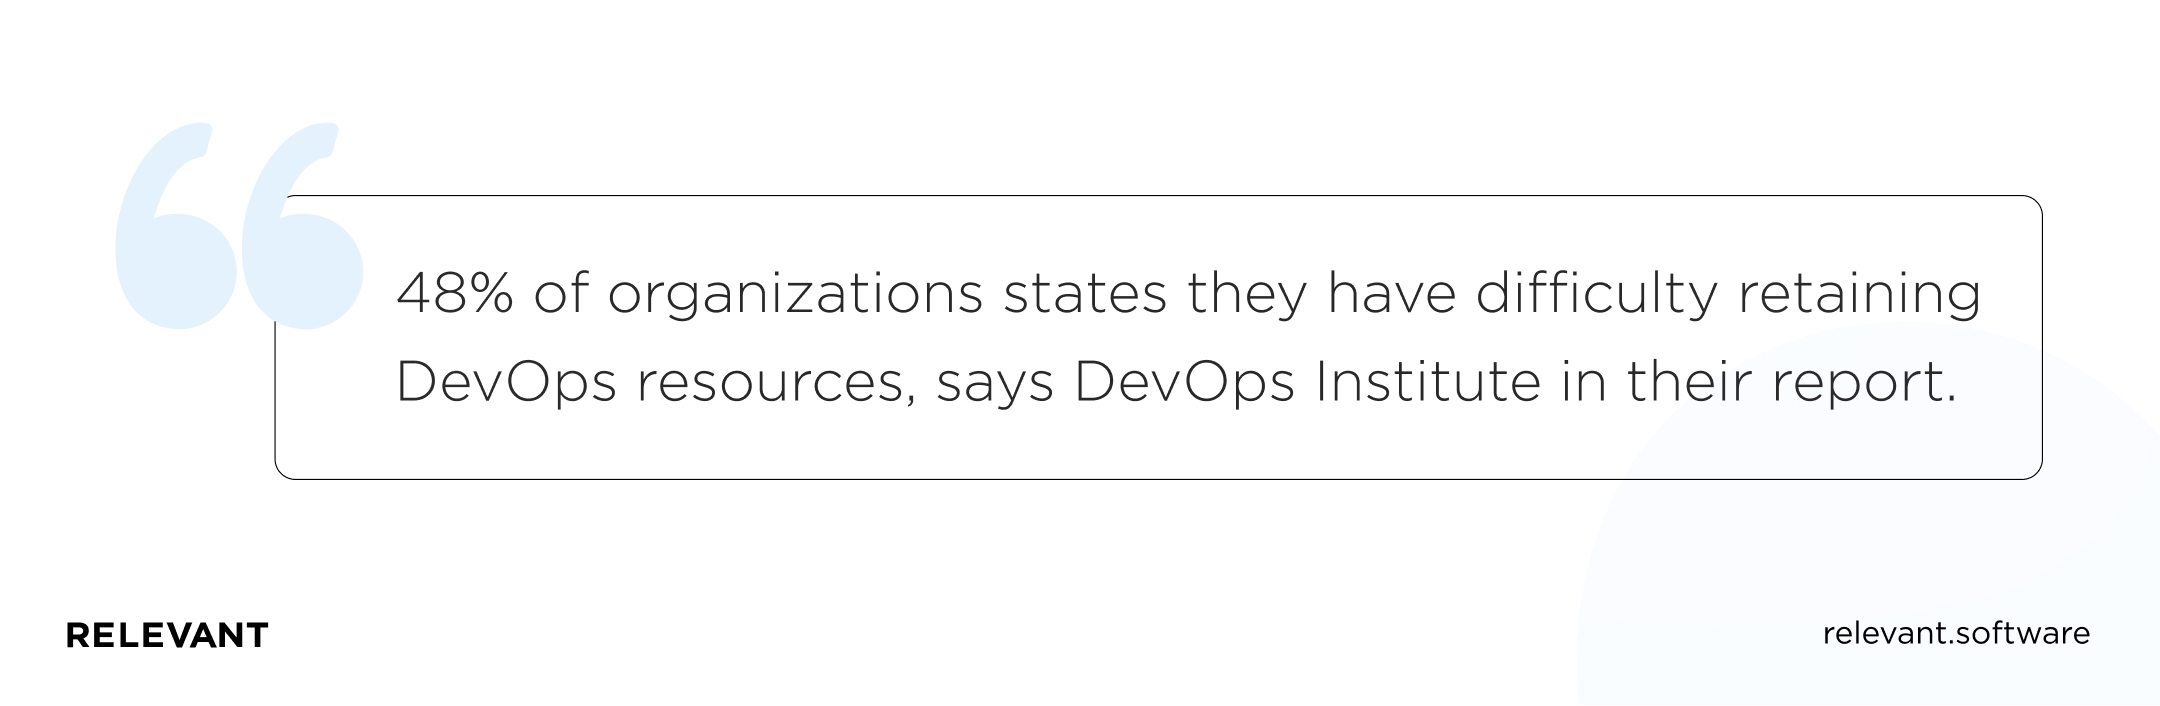 48% of organizations say they have difficulty retaining DevOps resources, says DevOps Institute in their report.